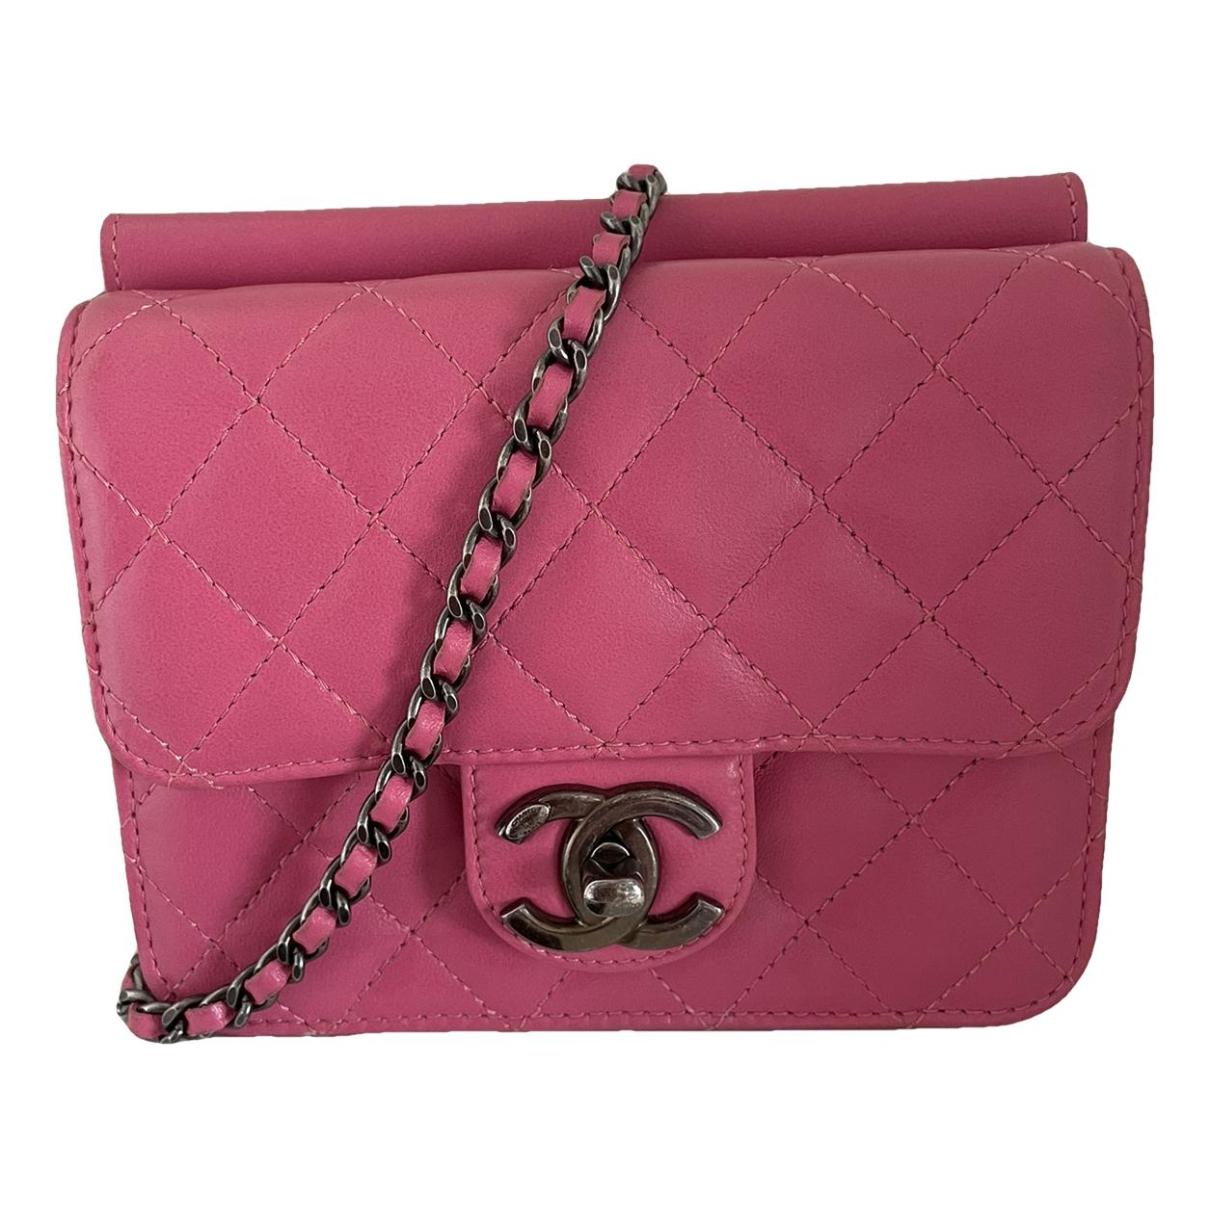 Timeless/classique leather crossbody bag Chanel Pink in Leather - 35641897